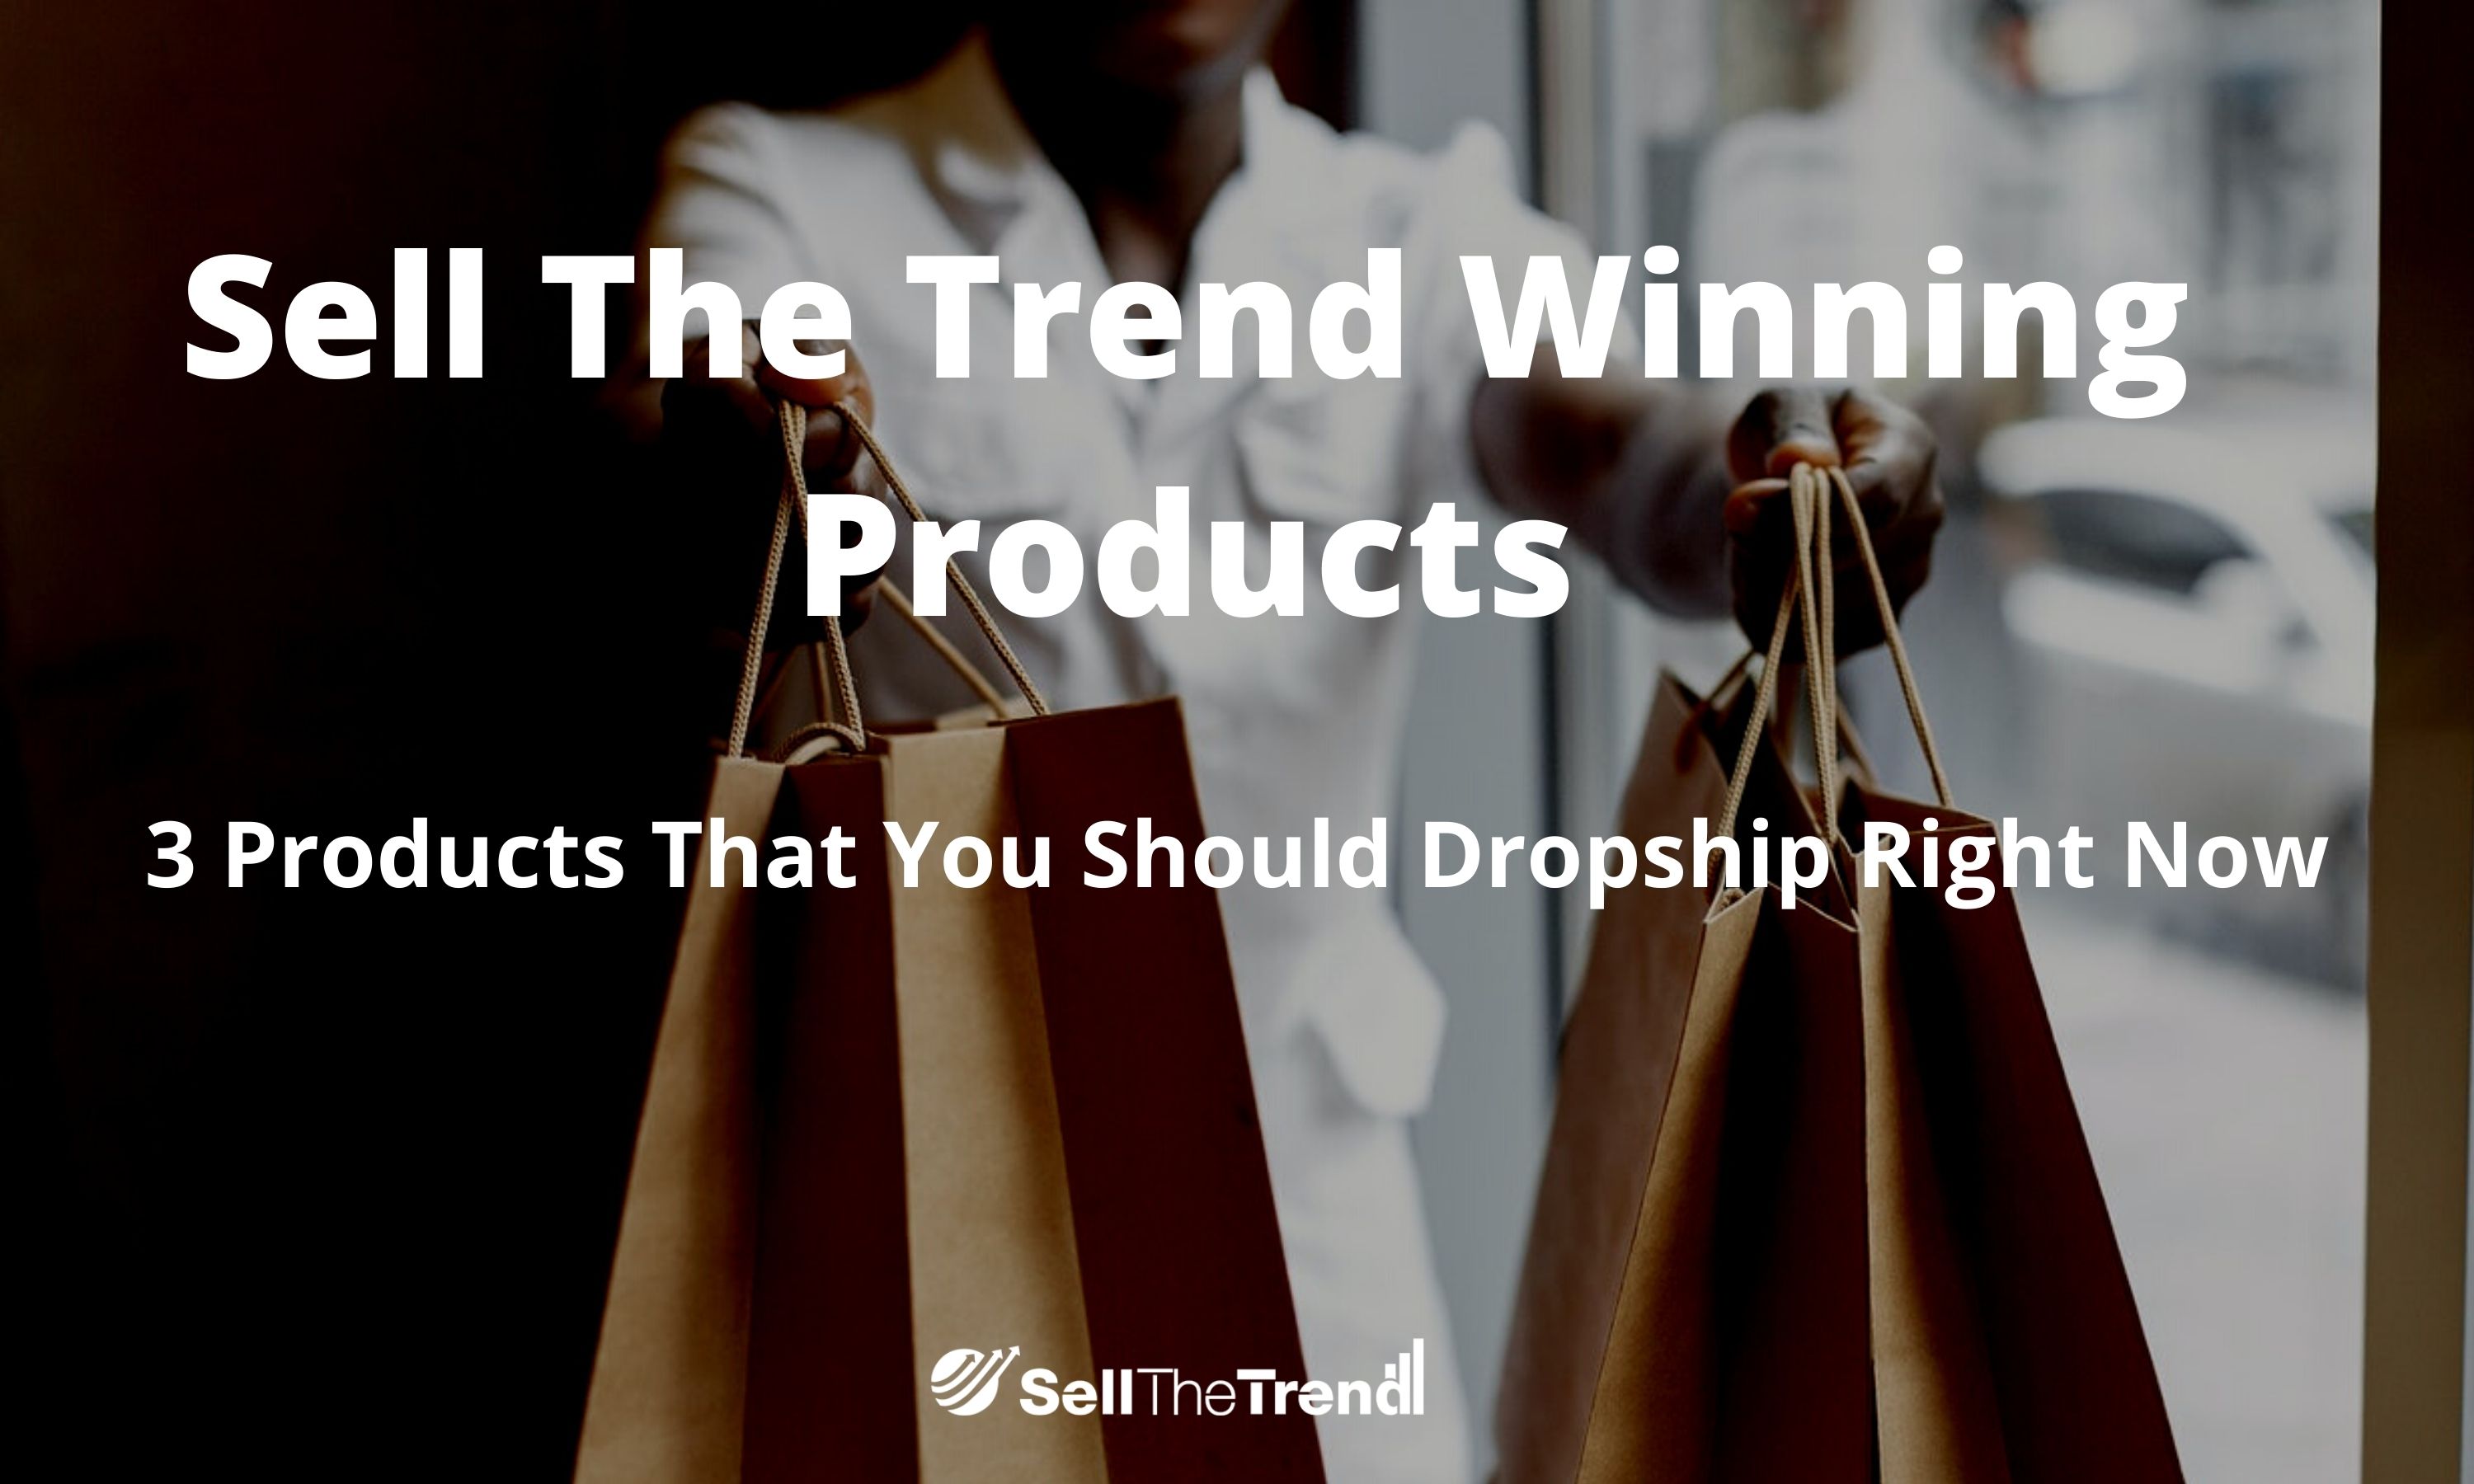 Sell The Trend Winning Products: 3 Products You Should Dropship Right Now